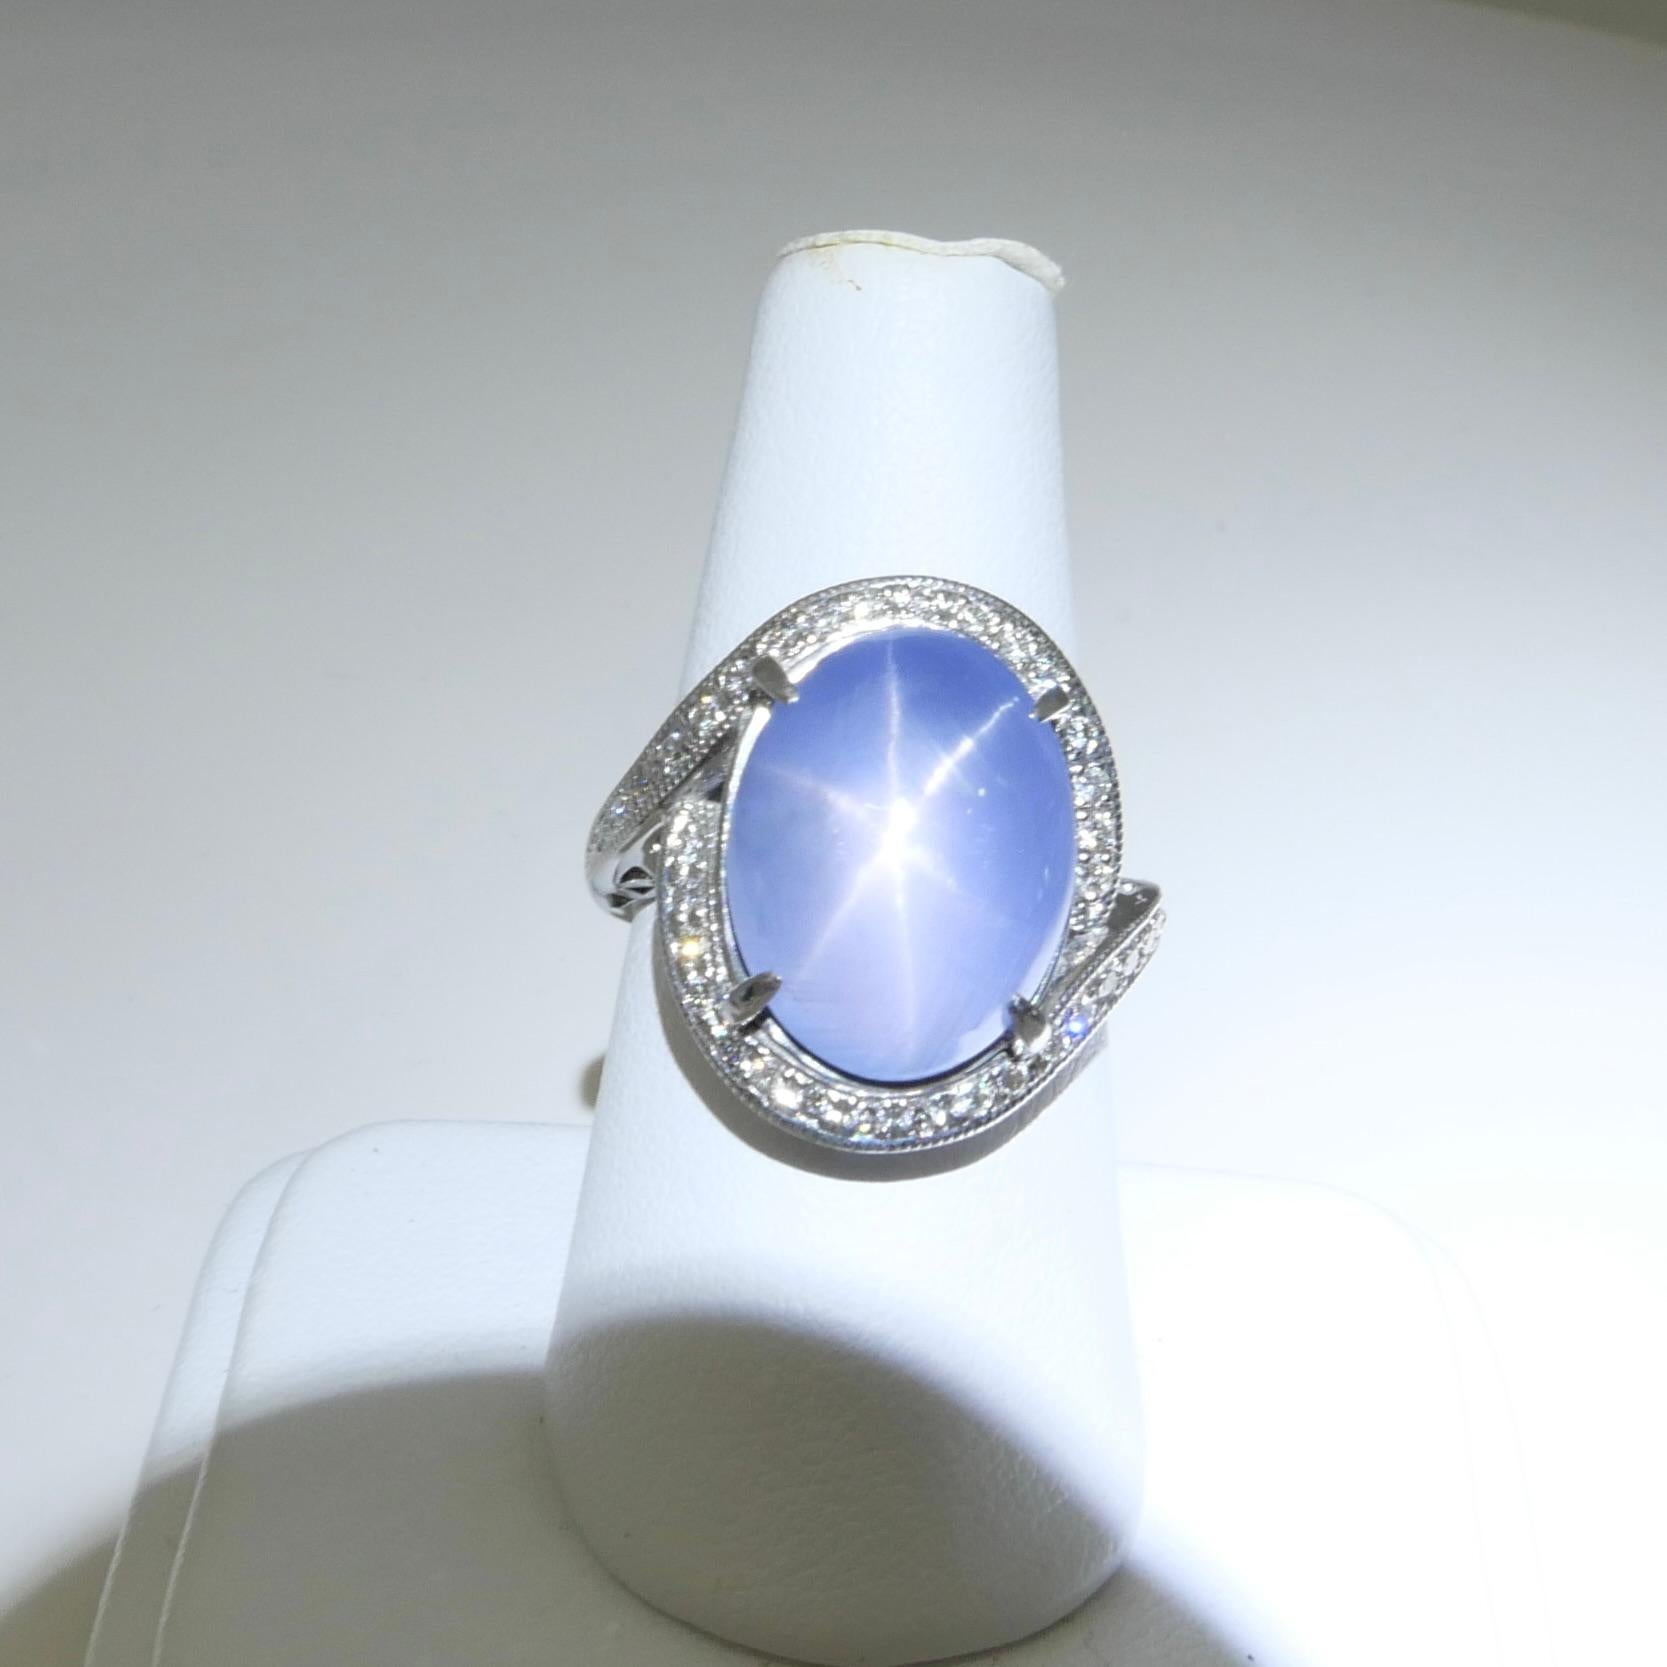 GRS Certified 19 Carats Star Sapphire & Diamond Ring by Tasaki, Strong Star 8